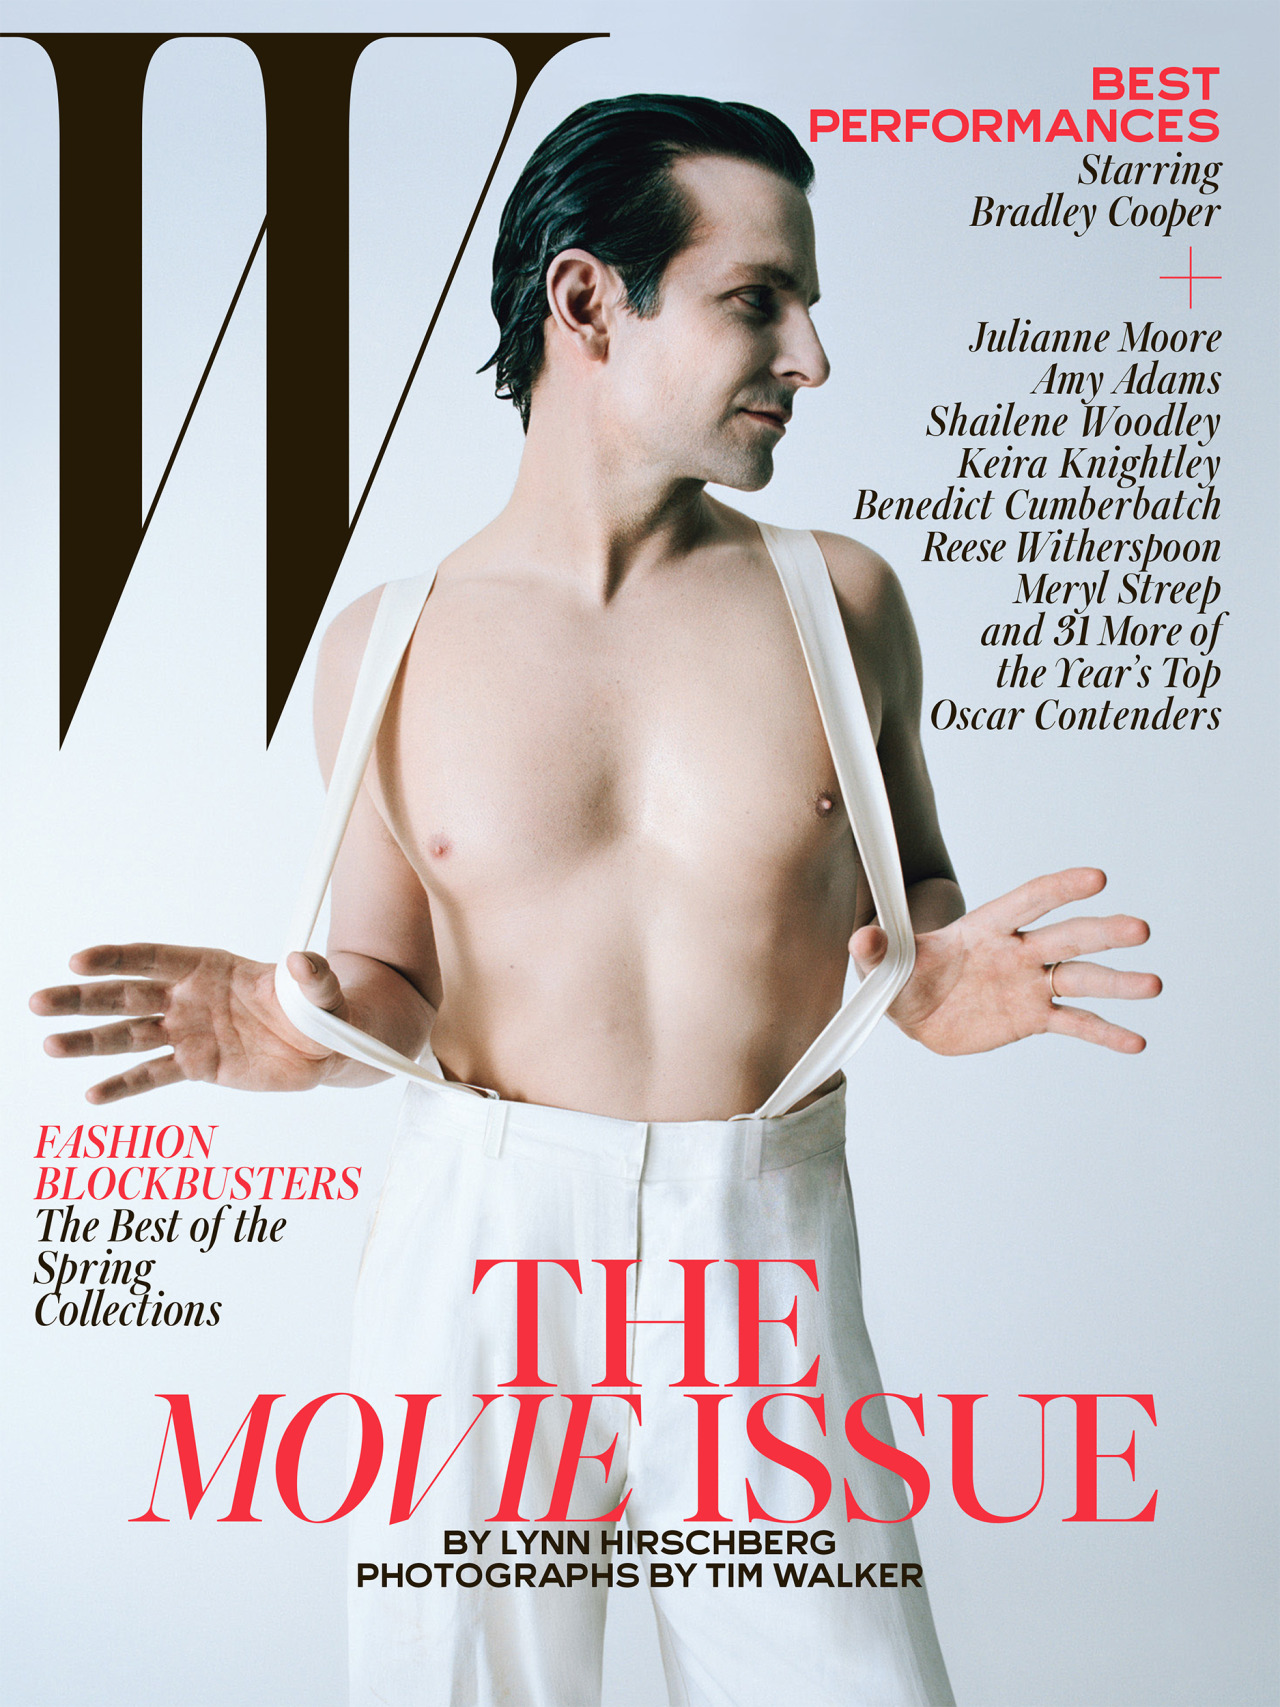 Bradley Cooper&#8217;s Cover Debut
Photograph by Tim Walker; styled by Jacob K; W magazine February 2015. 